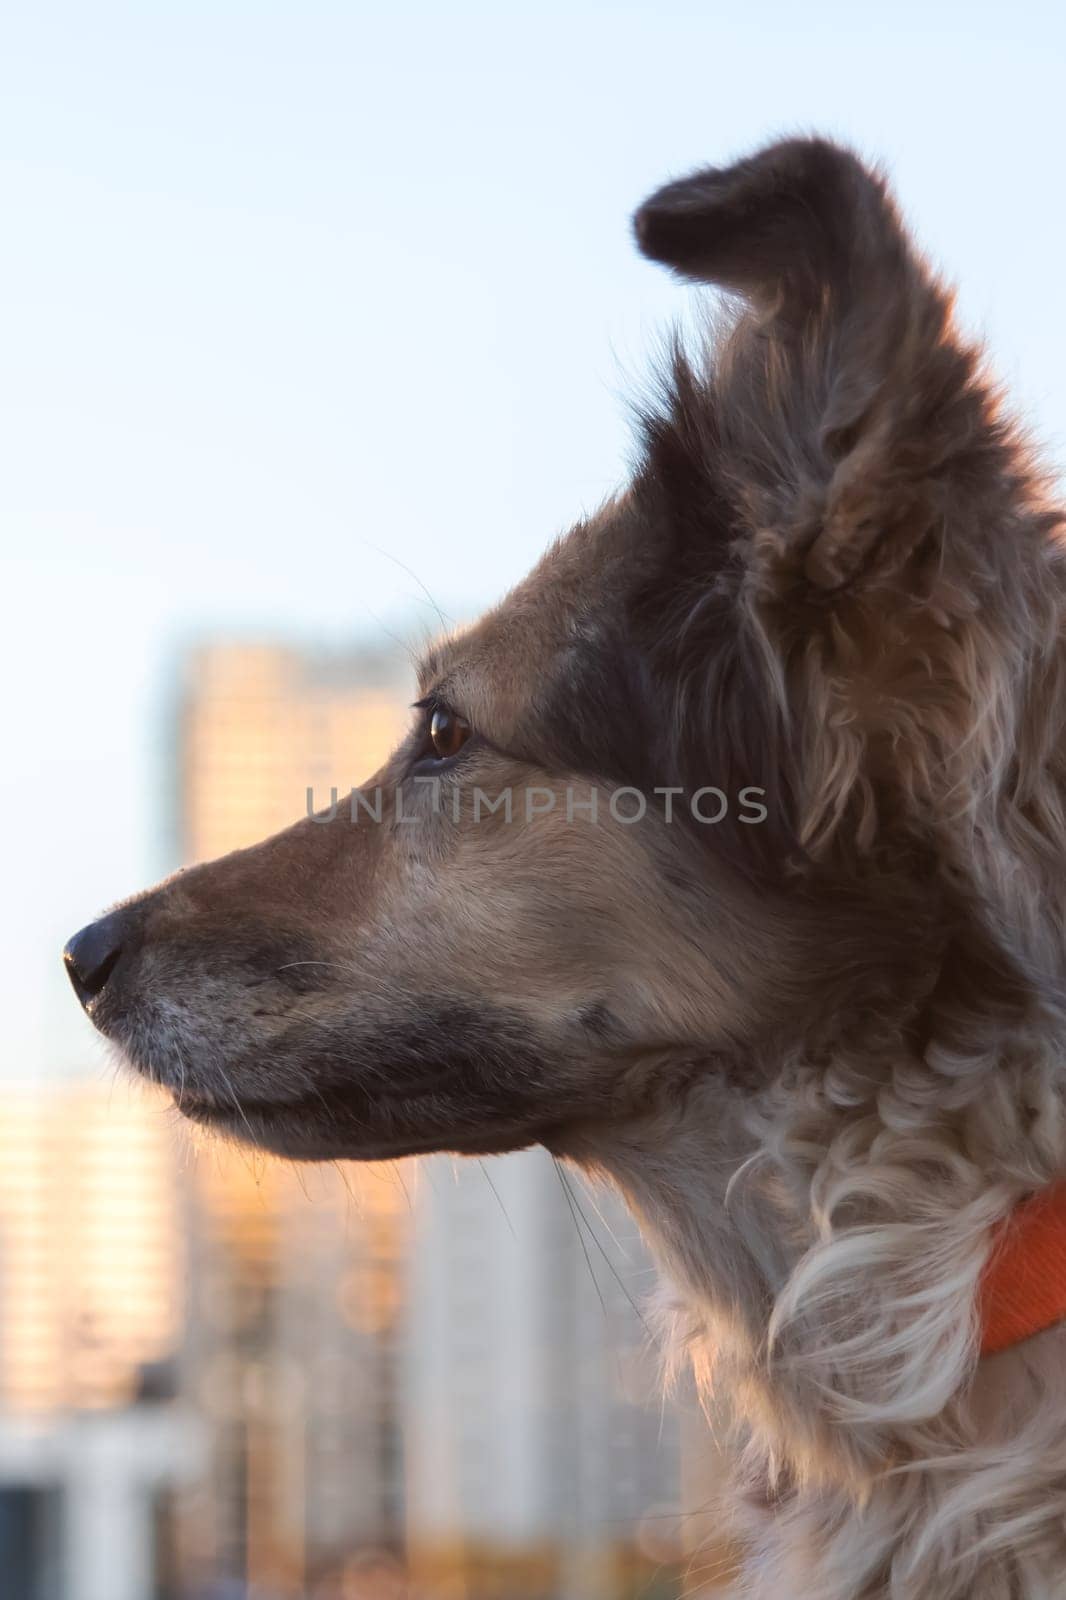 Fluffy dog sitting against the backdrop of modern tall buildings